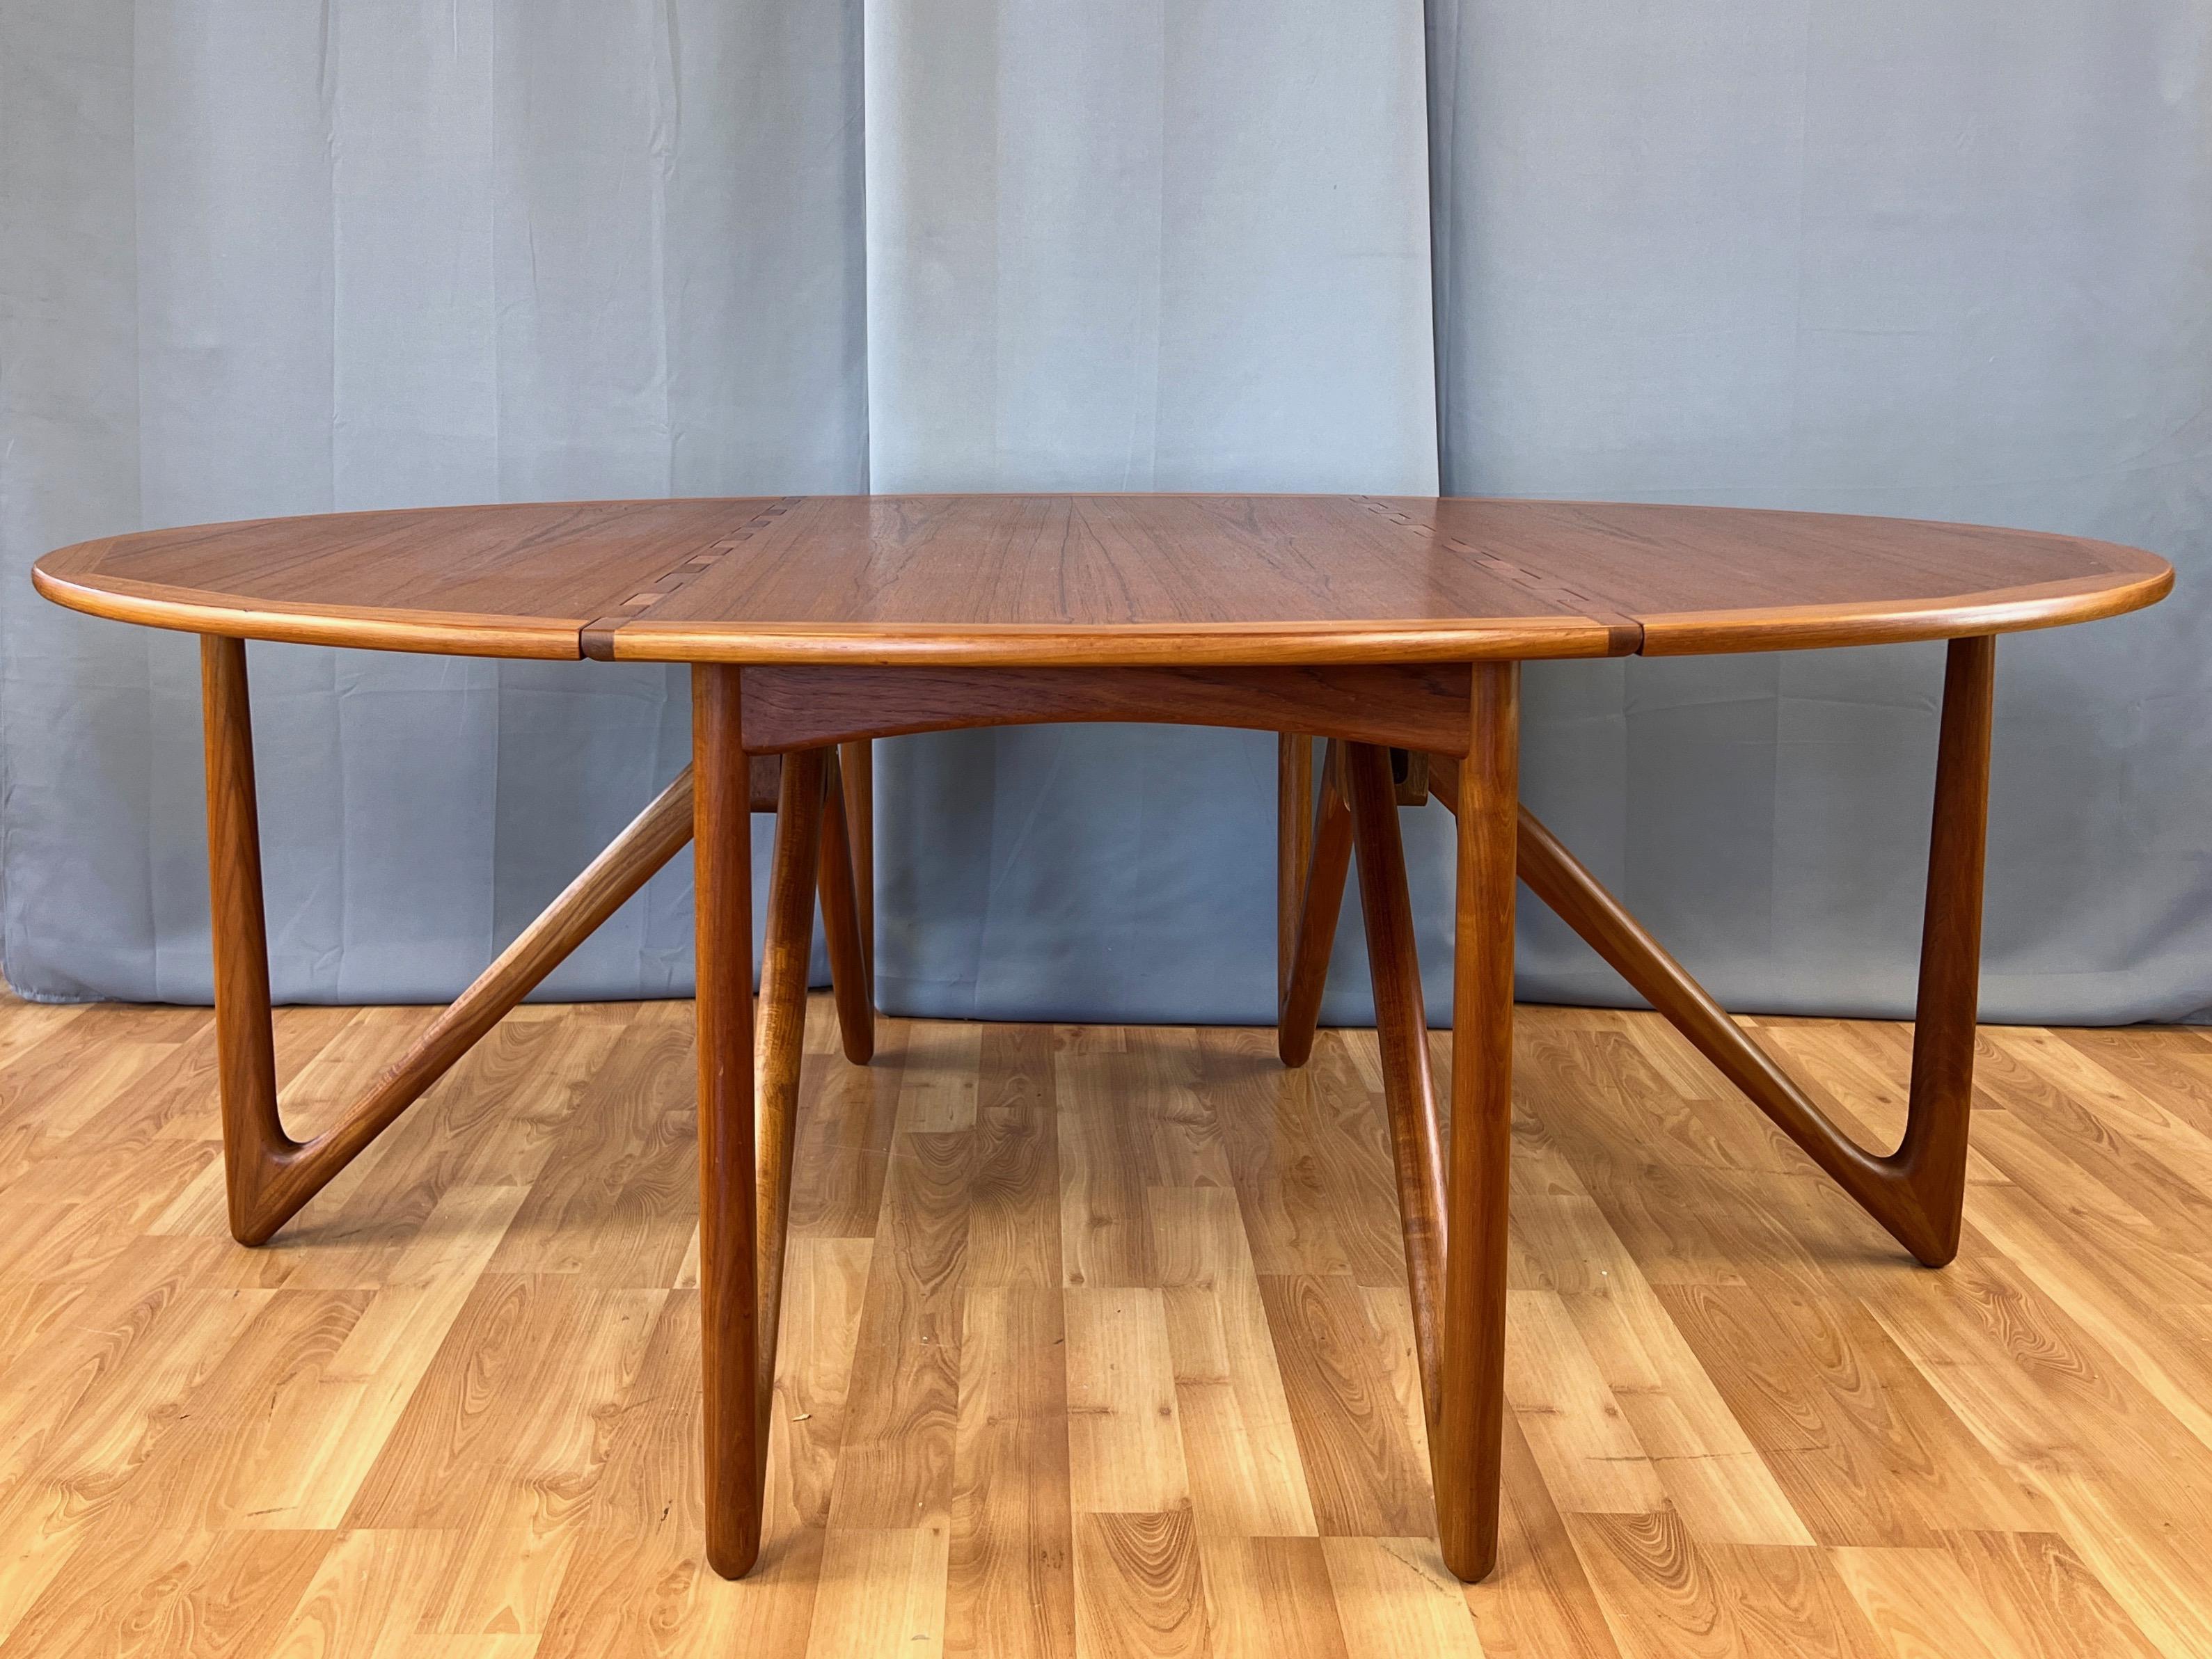 A stunning 1960s teak drop-leaf dining table by Kurt Østervig for Jason Møbler.

Notable for elevating the quotidian hinge to an aesthetically striking design element. Equally impressive are the handsomely V-shaped swing-out solid teak legs, which